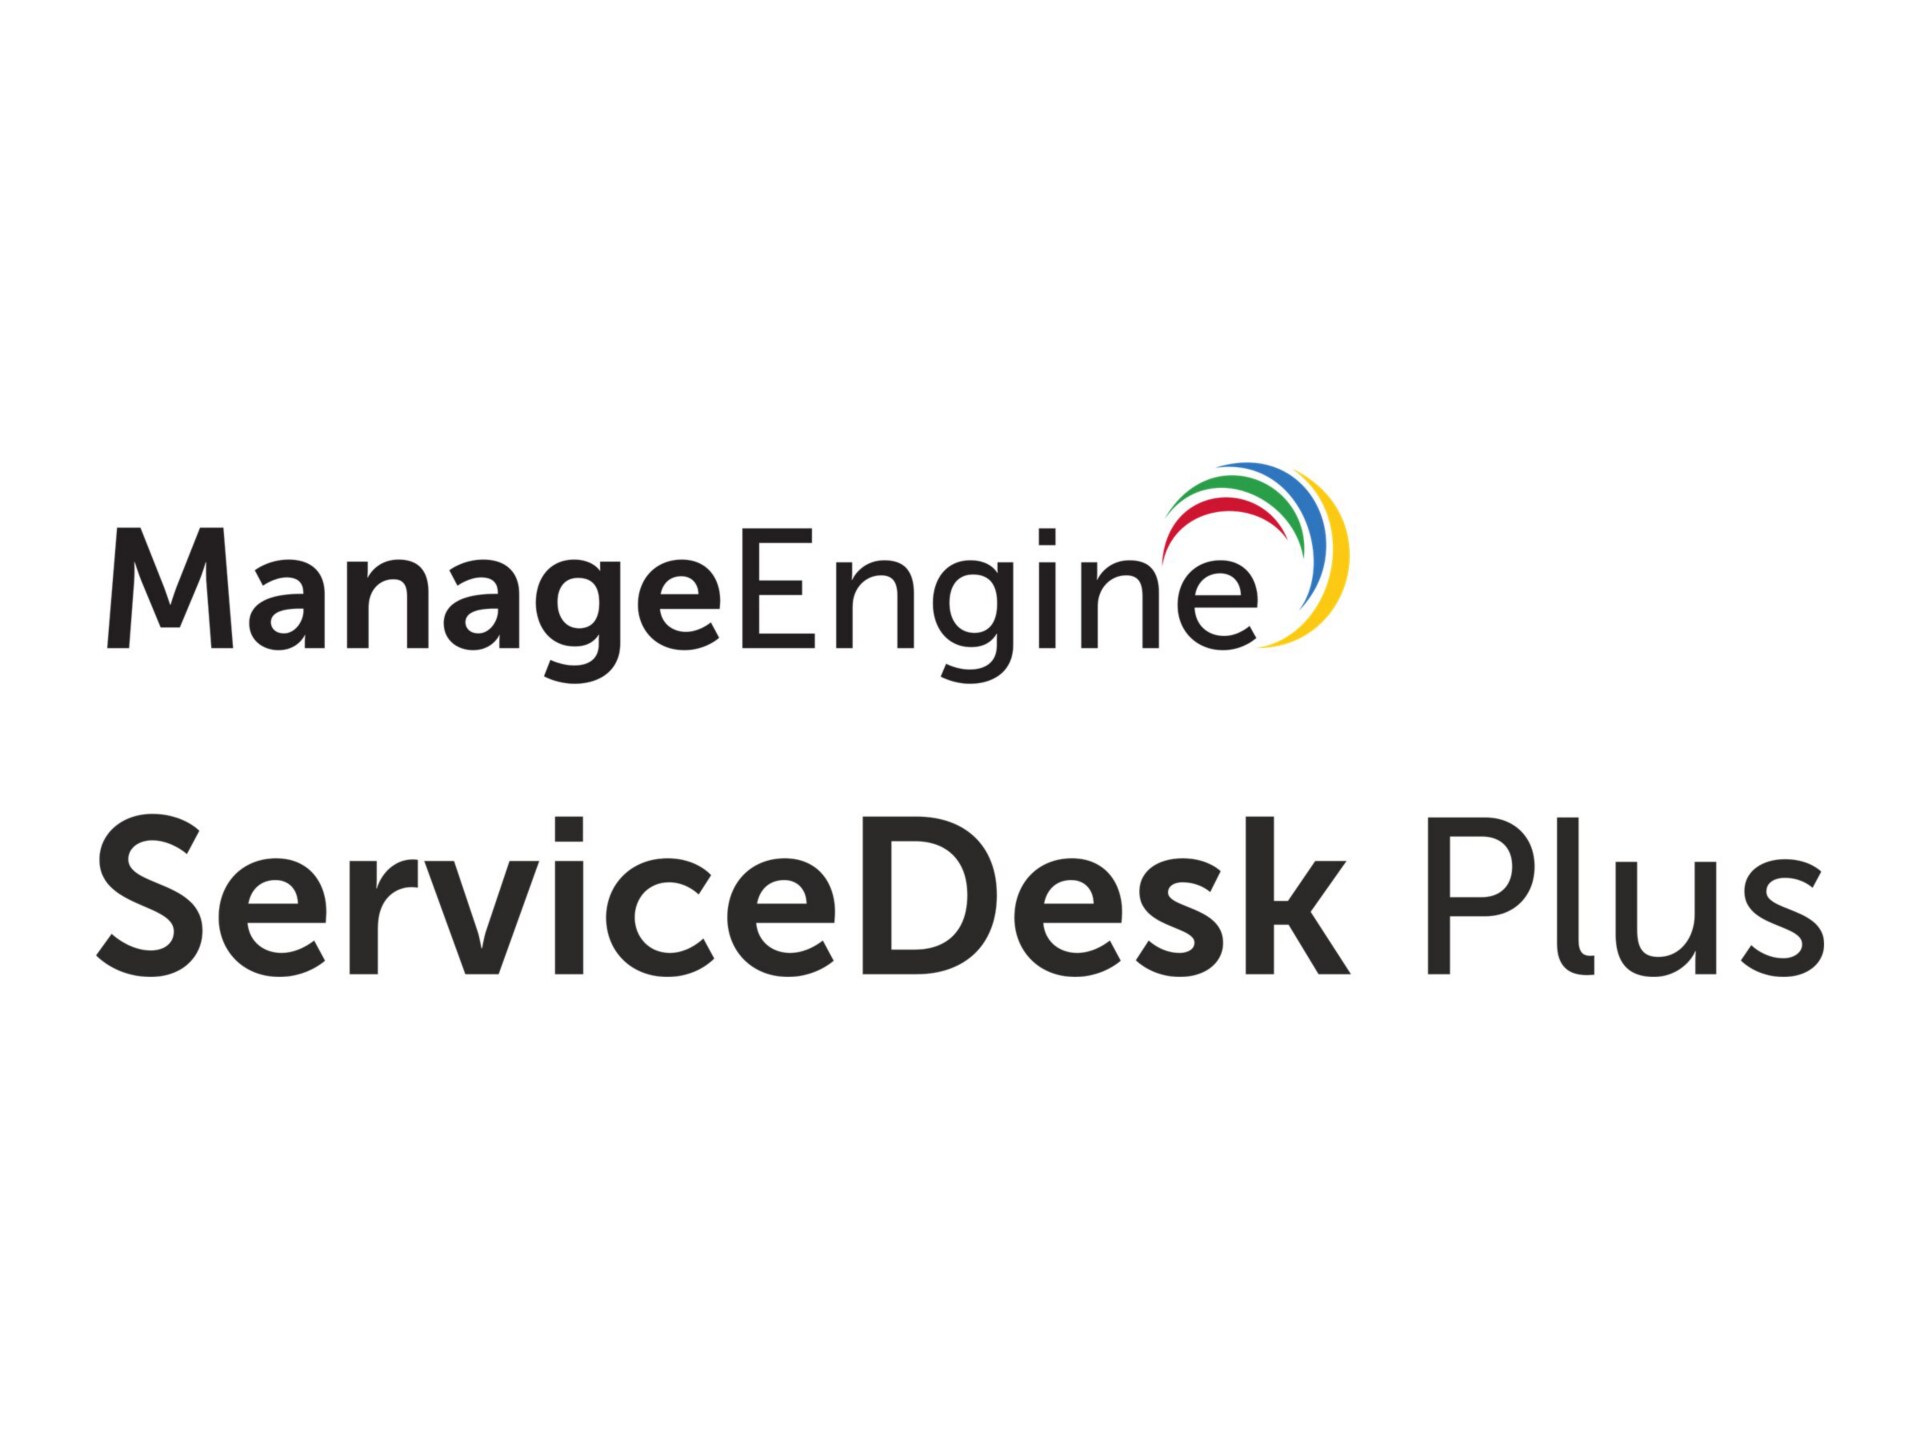 ManageEngine ServiceDesk Plus UEM Remote Access Plus Add-ons - subscription